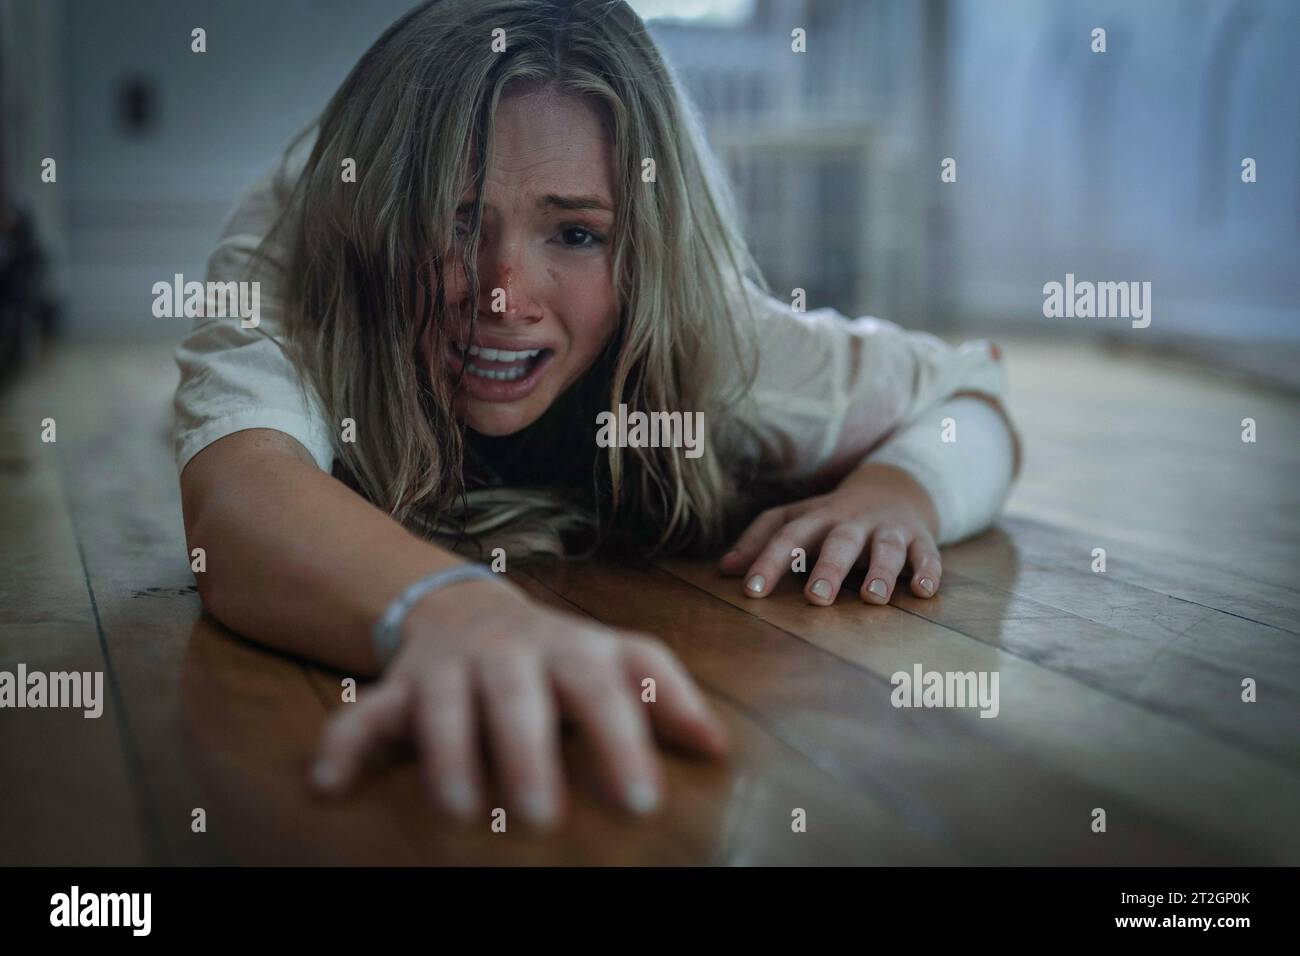 Pet Sematary Bloodlines  Natalie Alyn Lind Stock Photo